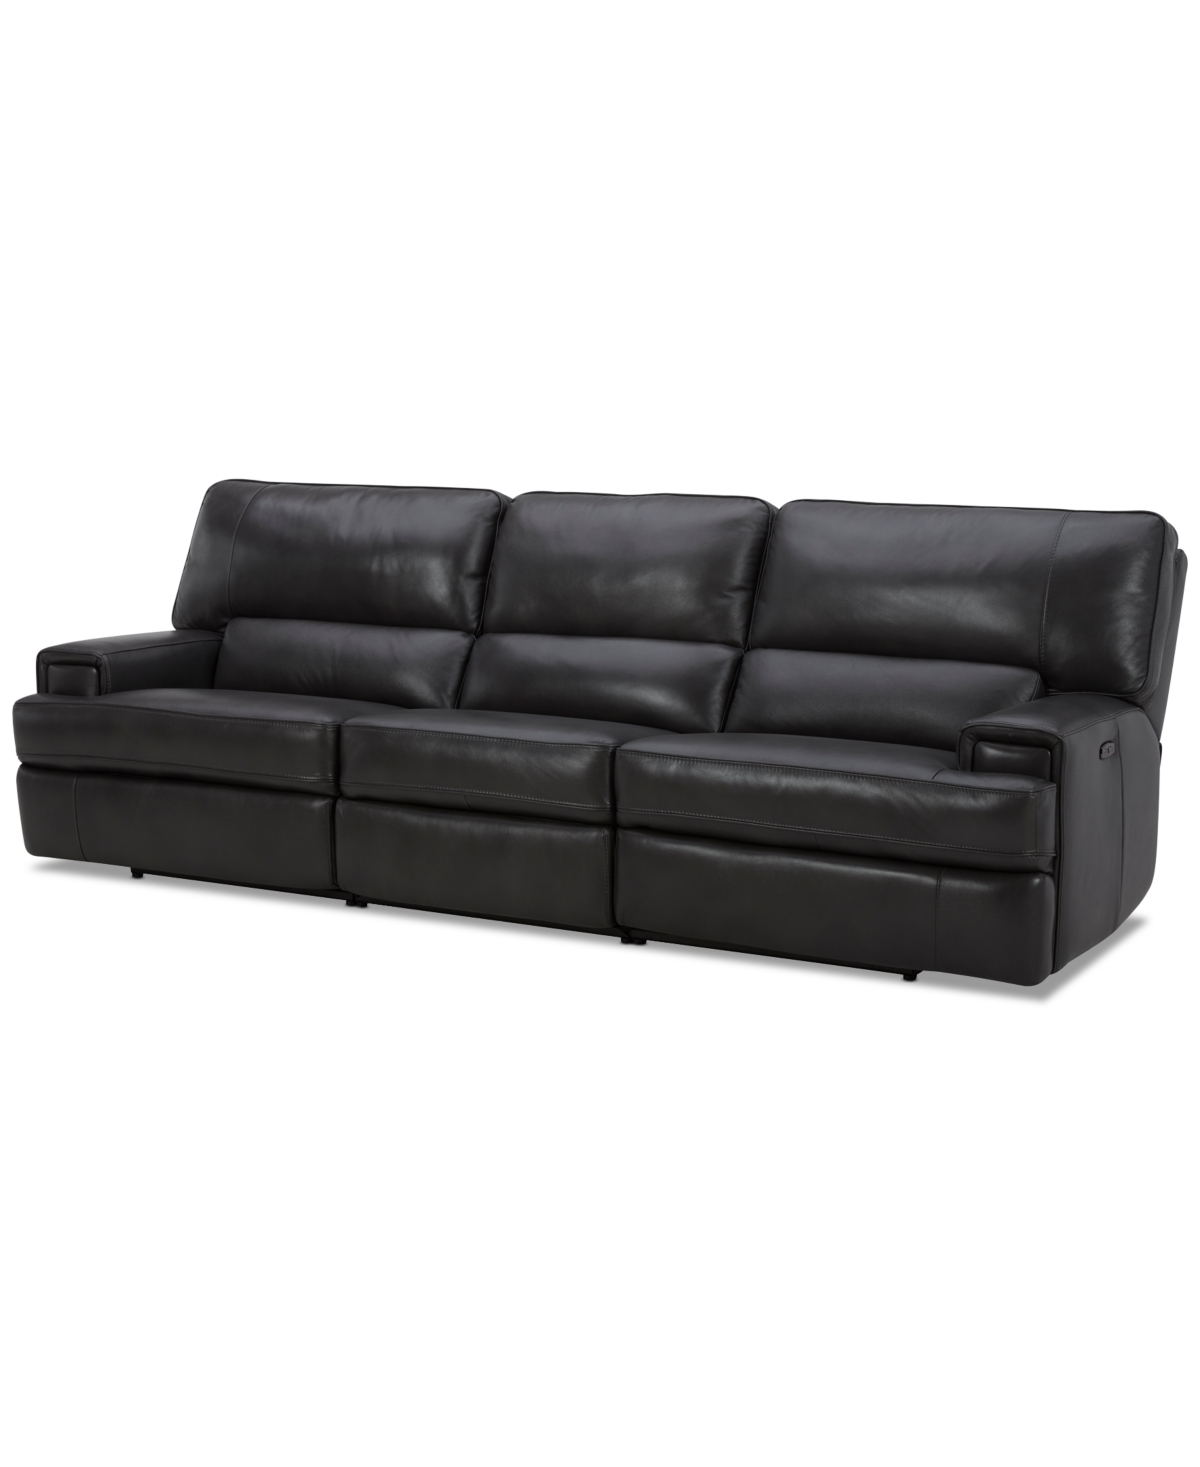 Furniture Binardo 118" 3 Pc Zero Gravity Leather Sectional With 3 Power Recliners, Created For Macy's In Charcoal